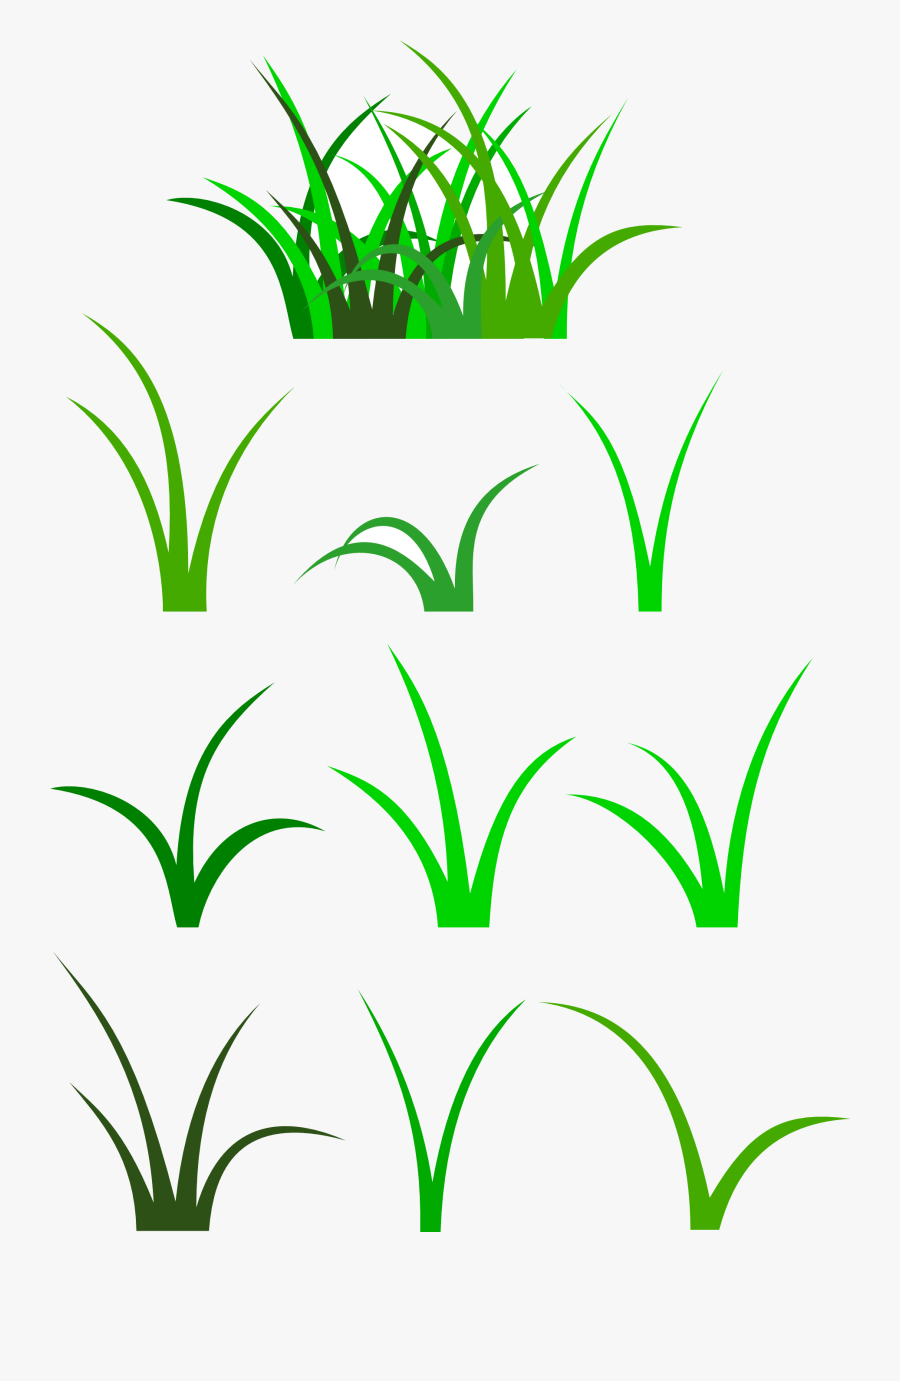 Grass Clipart Black And White Free Images Transparent - Grass Blade Clipart, Transparent Clipart